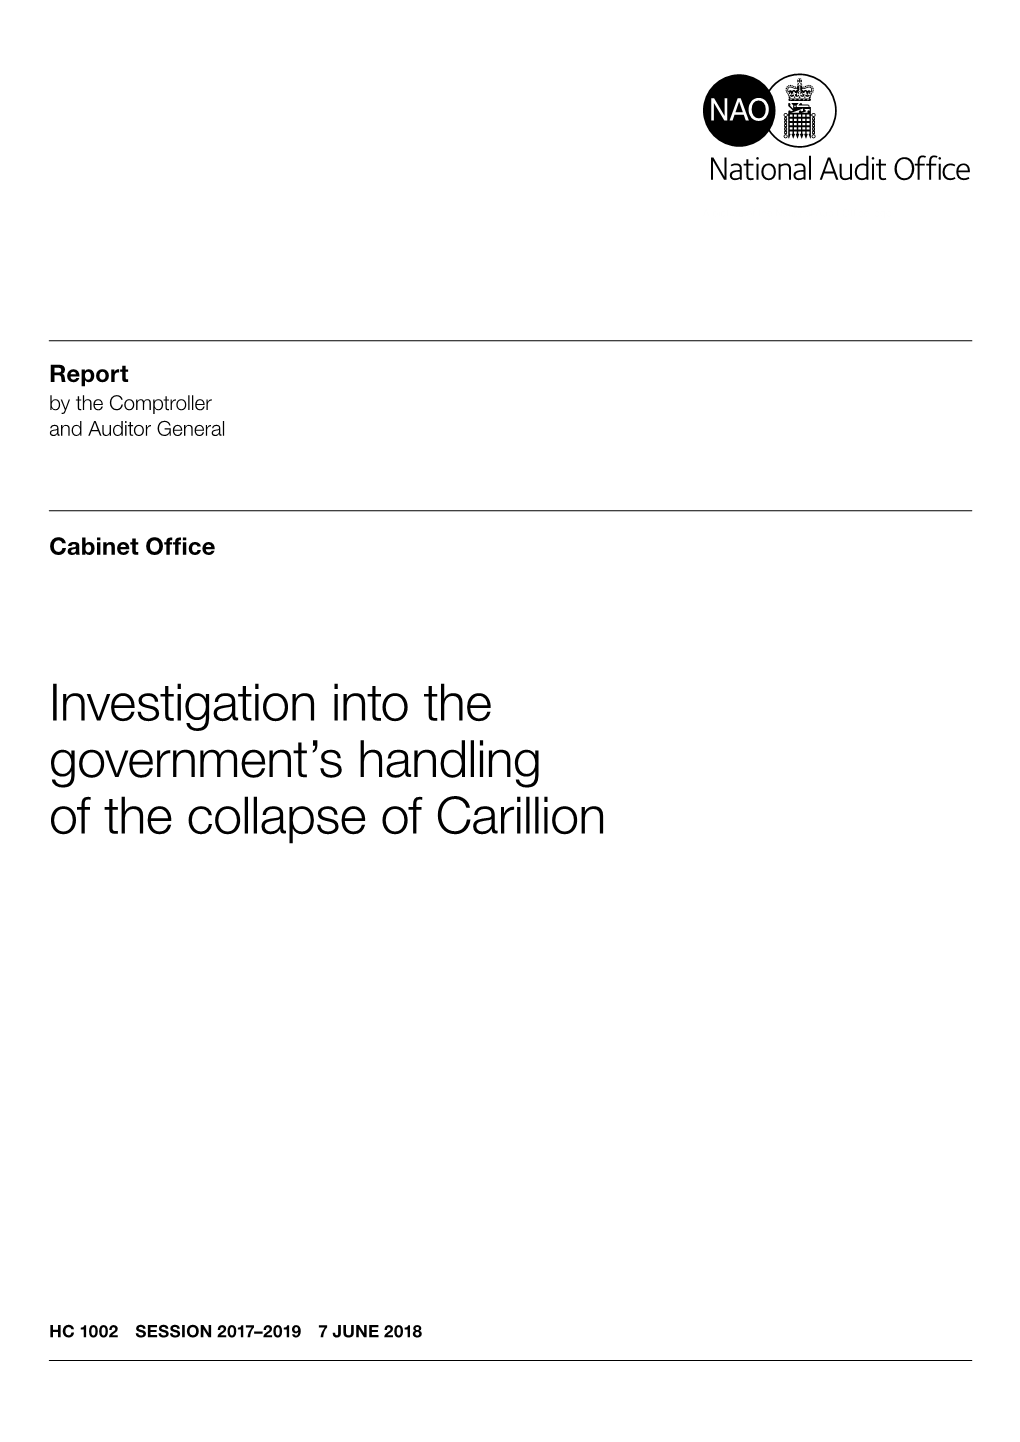 Investigation Into the Government's Handling of the Collapse of Carillion